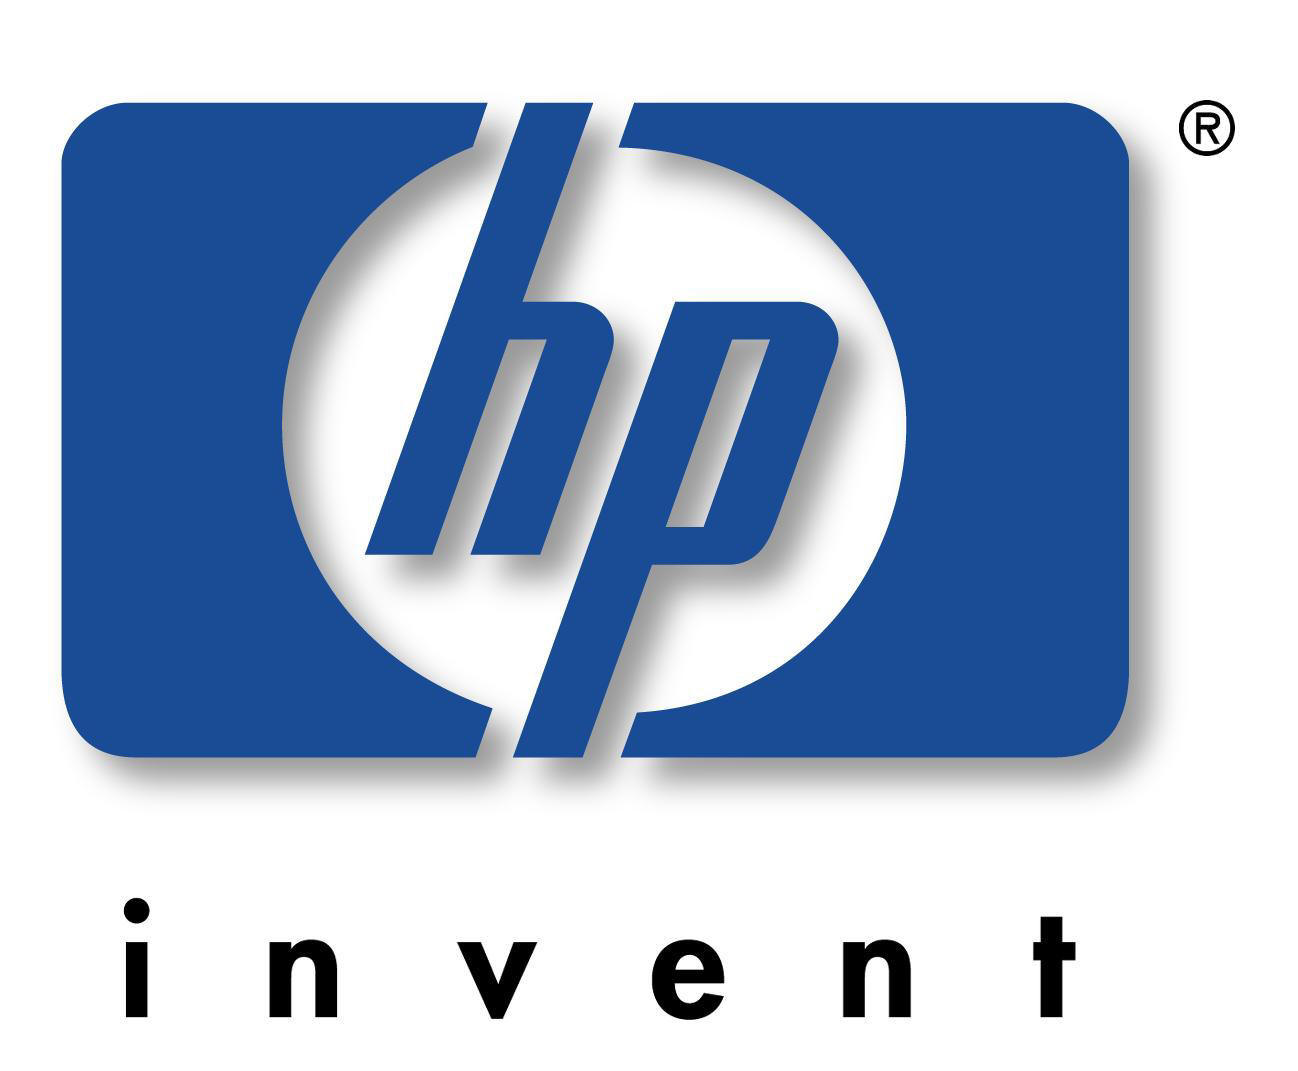 hp icon. Download PNG